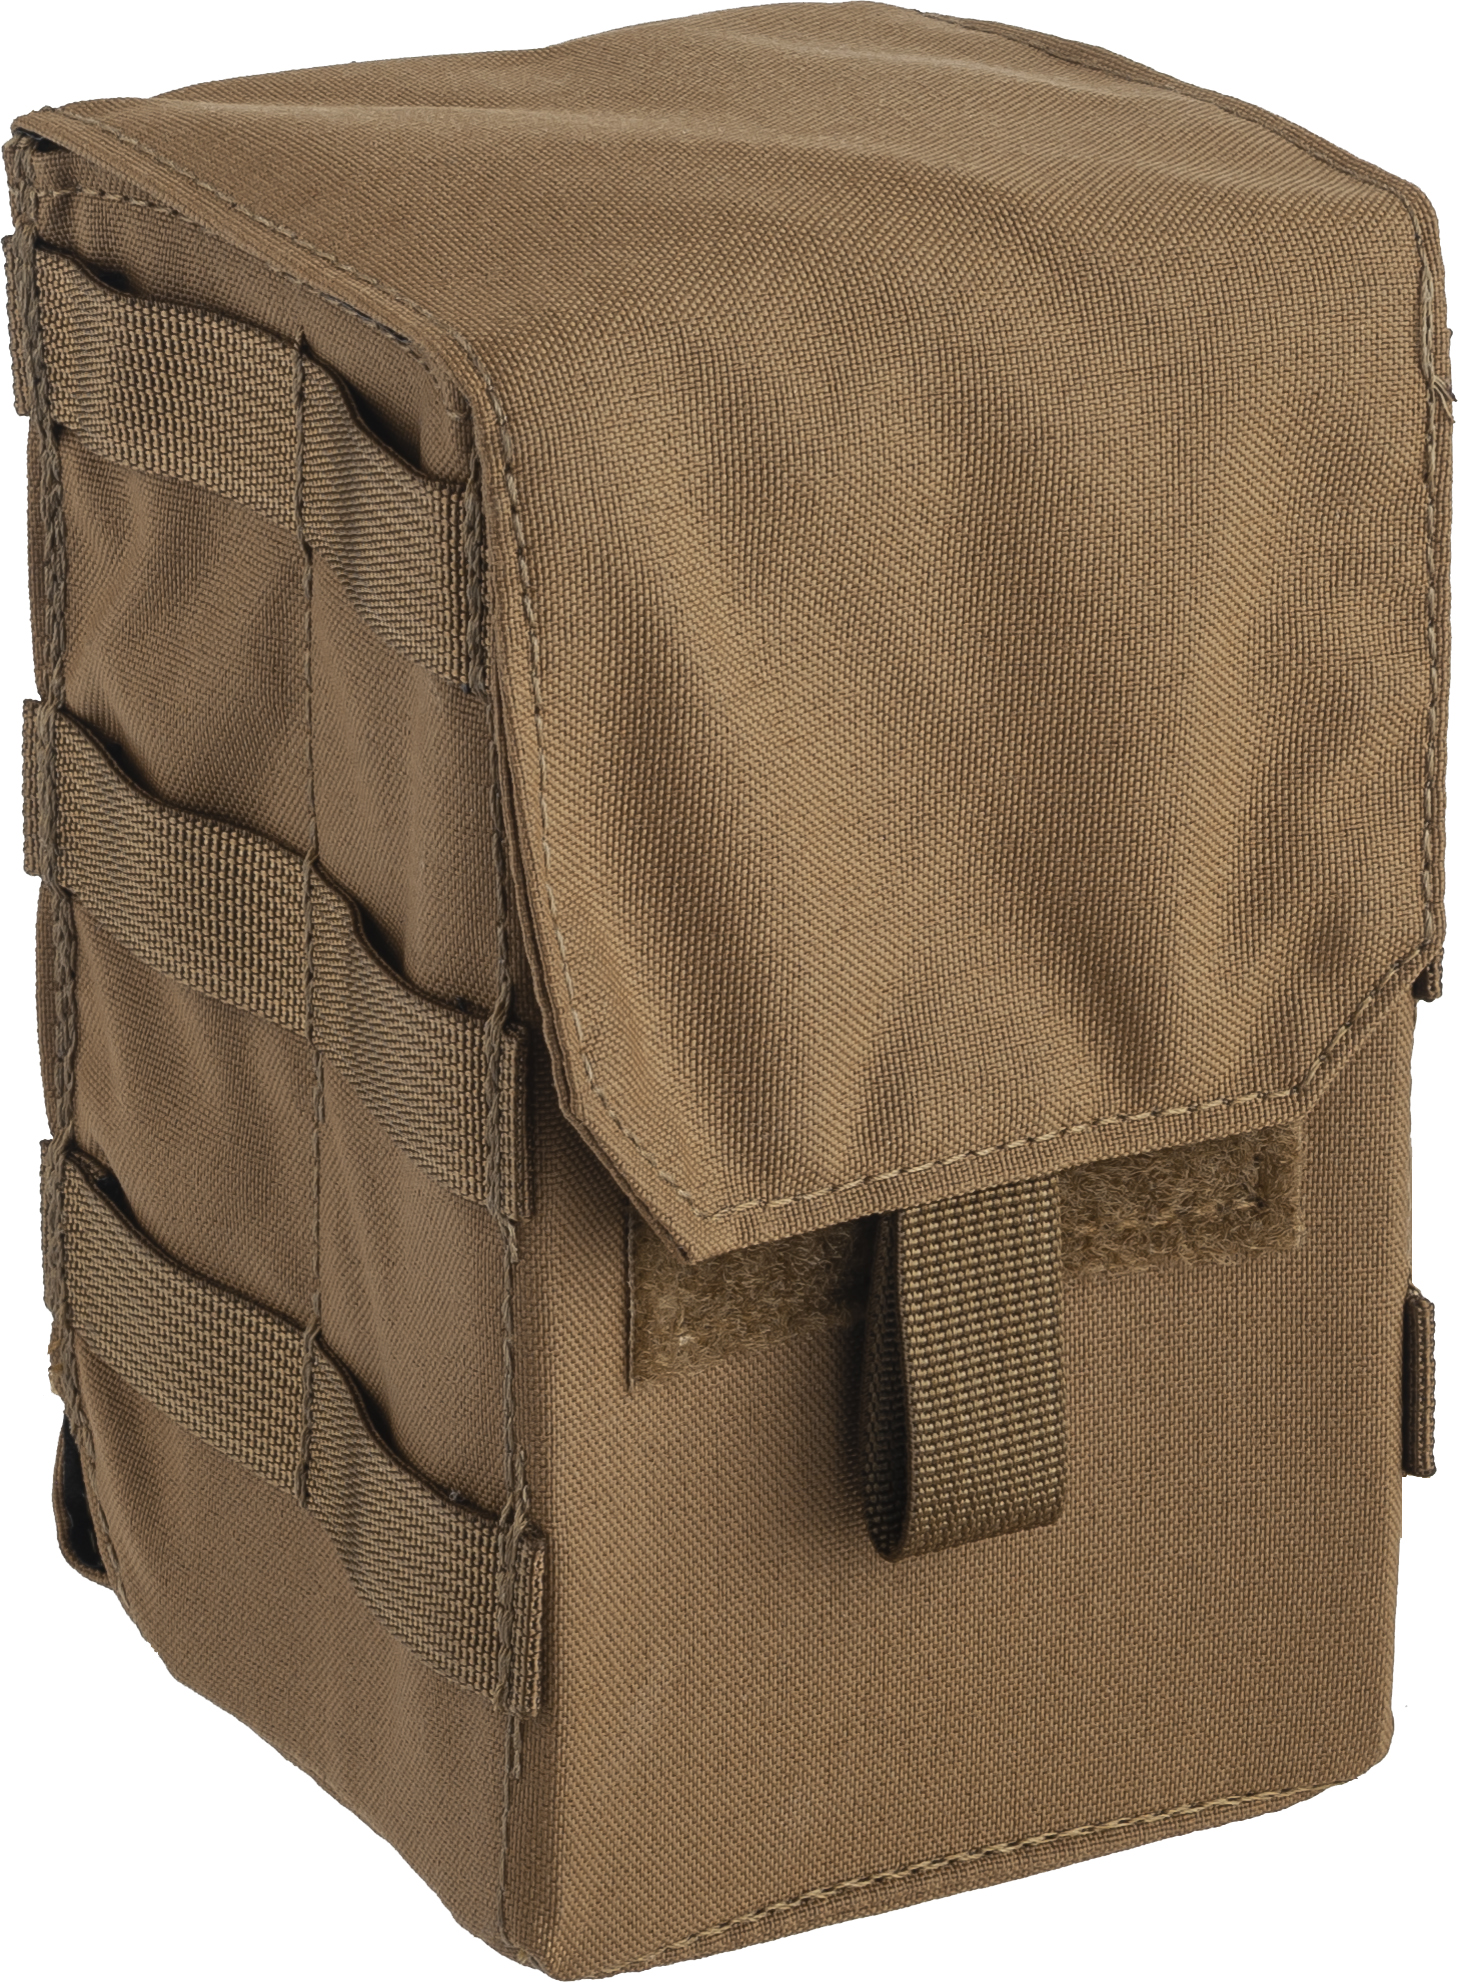 Tactical Tailor Fight Light Magpul D60 Mag Pouch | Up to $3.84 Off